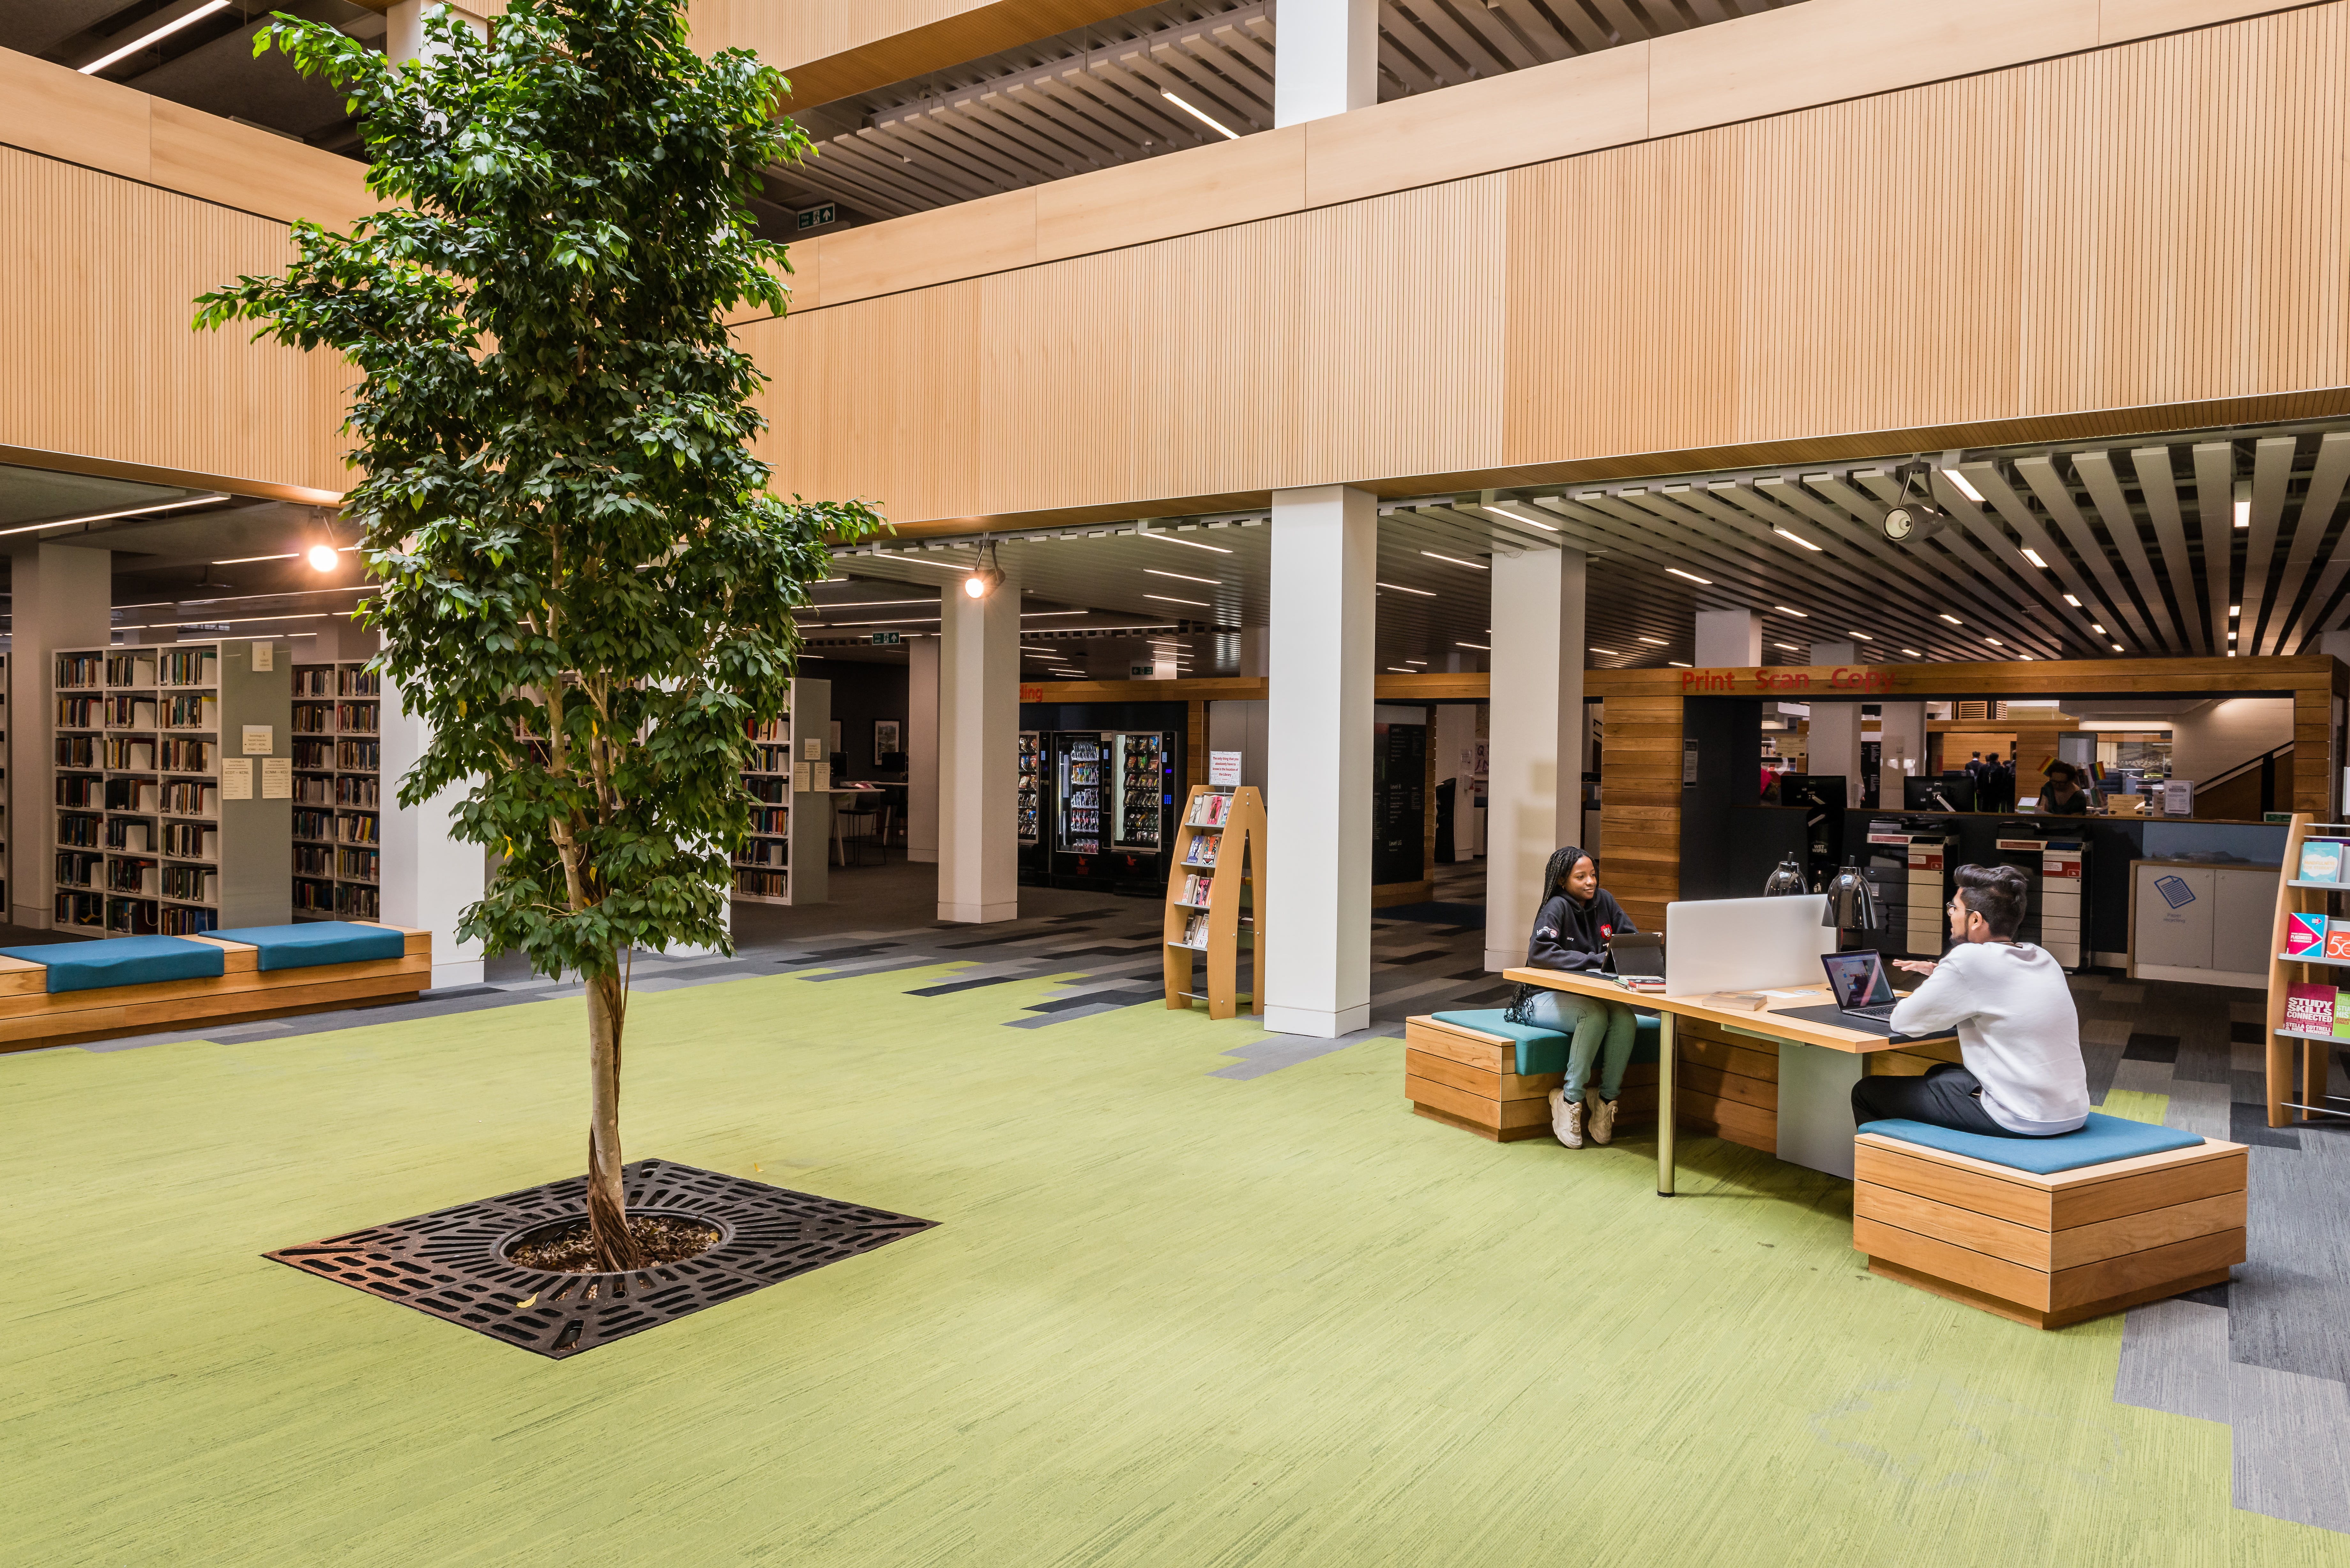 The library tree area with desks and book shelves in the background.